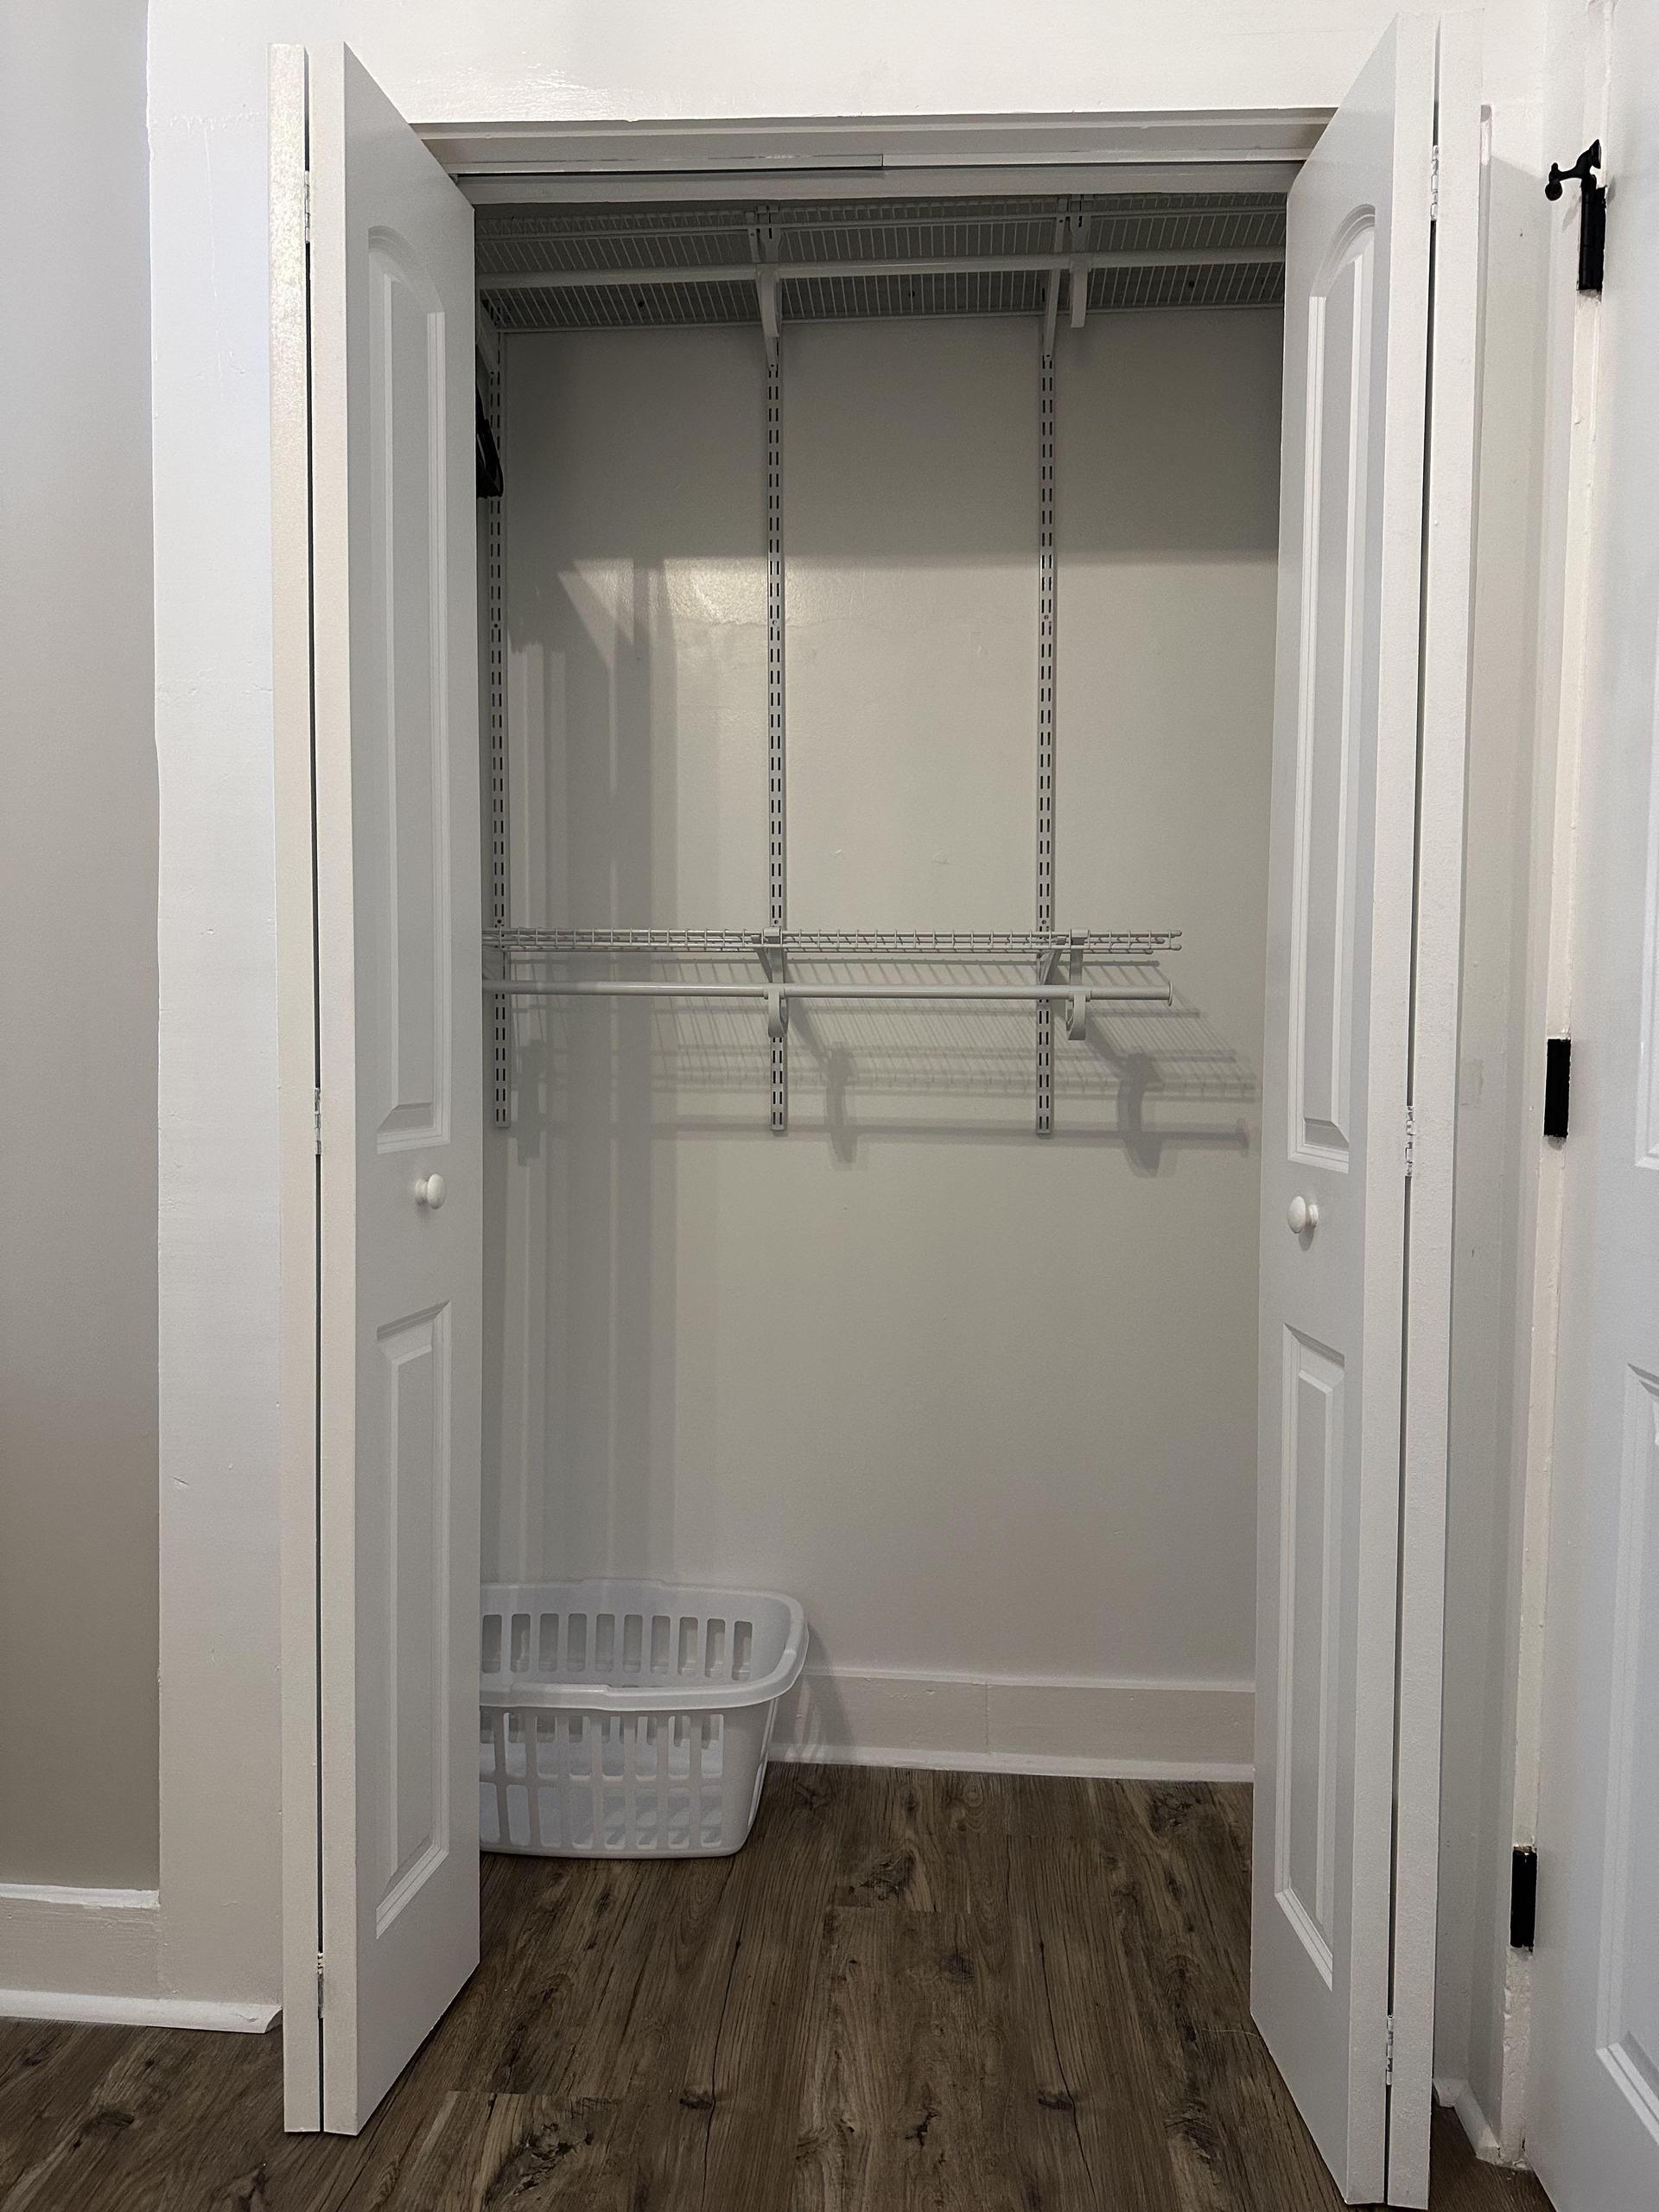 8 feet of closet shelving and hanging rod (total length for 2 levels)